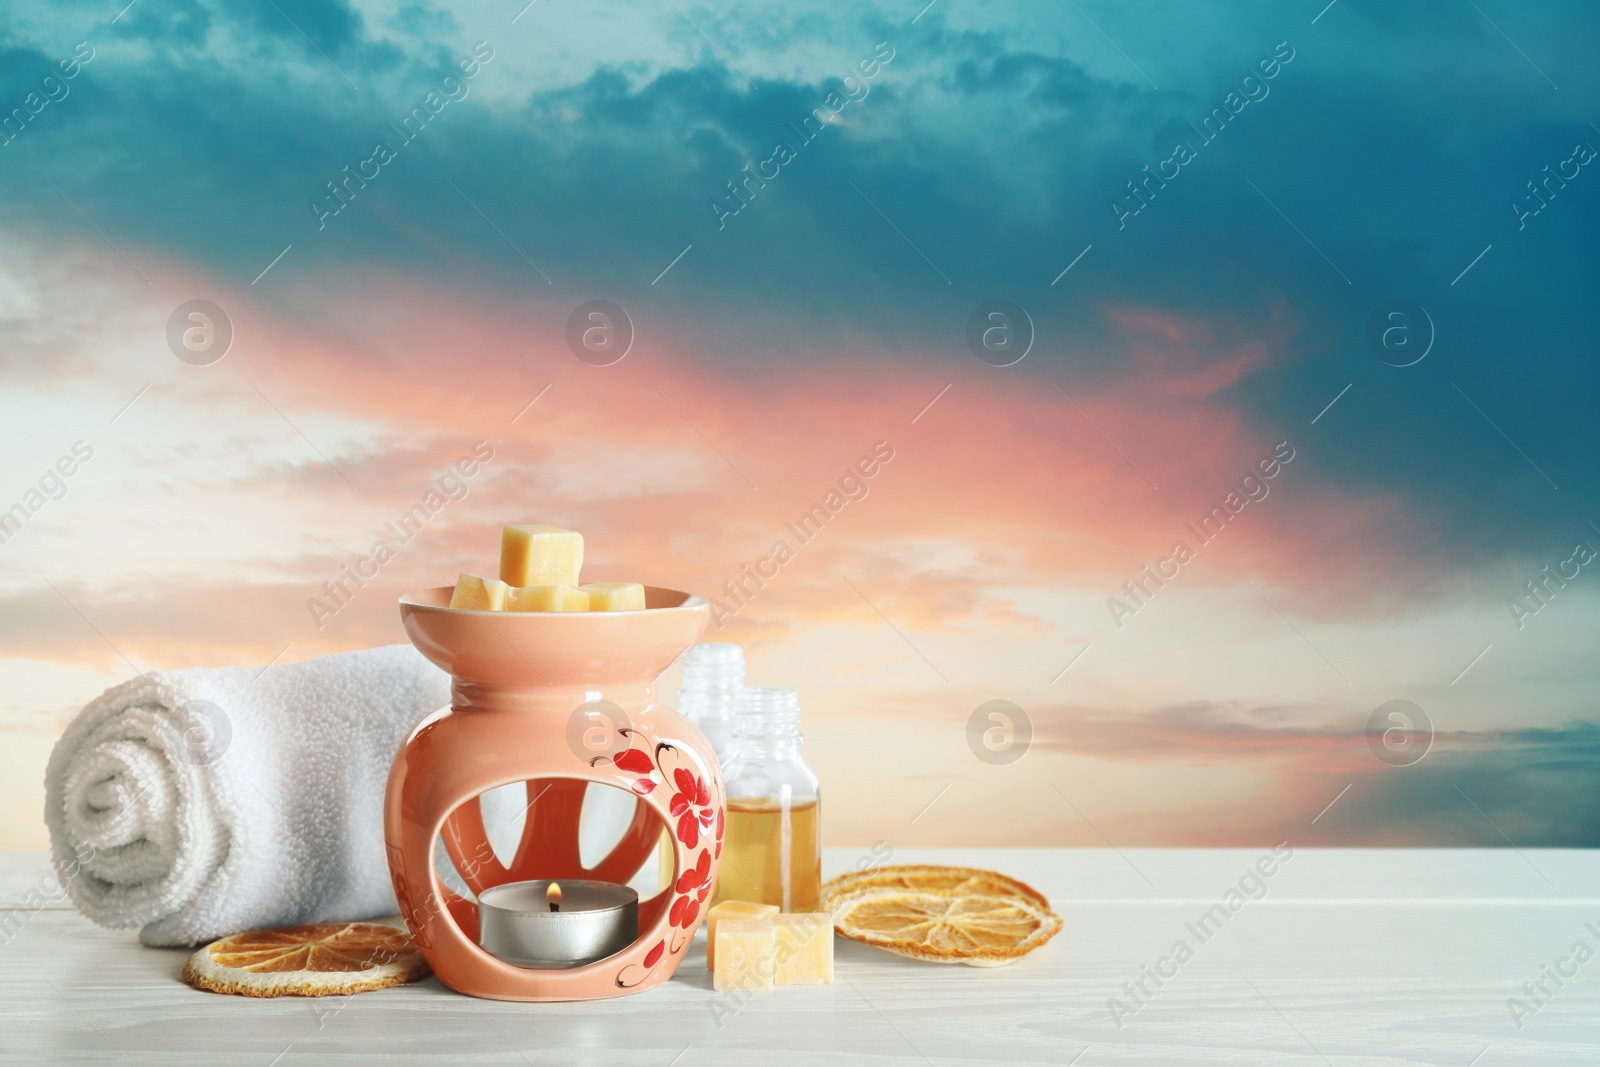 Image of Composition with aroma lamp on white wooden table outdoors at sunset, space for text